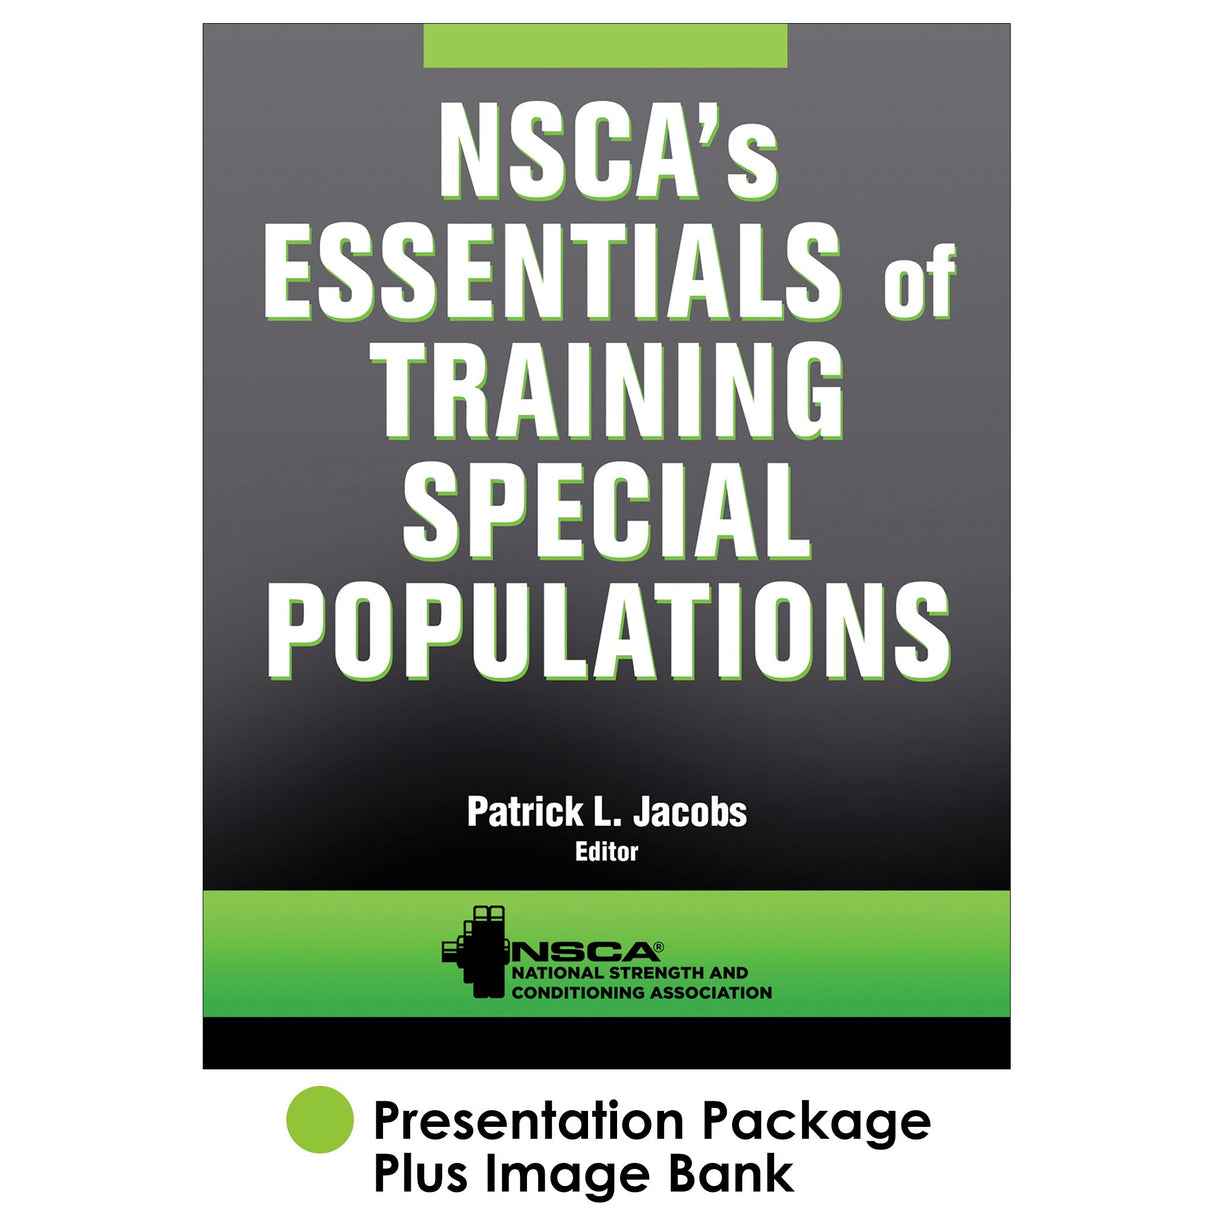 NSCA's Essentials of Training Special Populations HK Propel Presentation
Package plus Image Bank